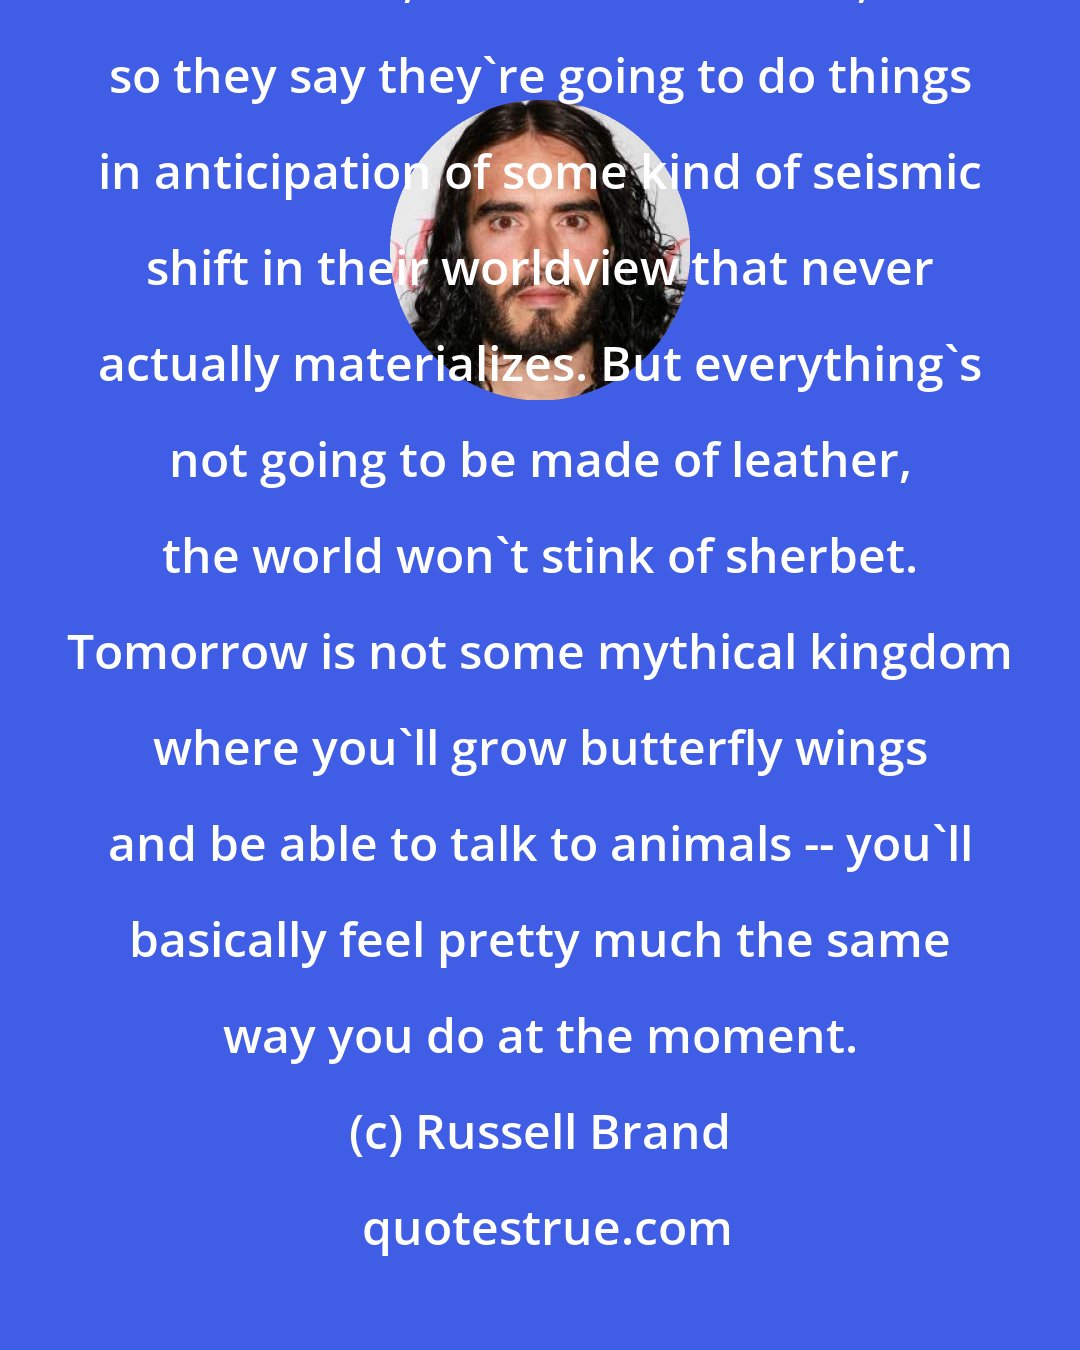 Russell Brand: People do this a lot. They don't seem to realise that the future is just like now, but in a little while, so they say they're going to do things in anticipation of some kind of seismic shift in their worldview that never actually materializes. But everything's not going to be made of leather, the world won't stink of sherbet. Tomorrow is not some mythical kingdom where you'll grow butterfly wings and be able to talk to animals -- you'll basically feel pretty much the same way you do at the moment.